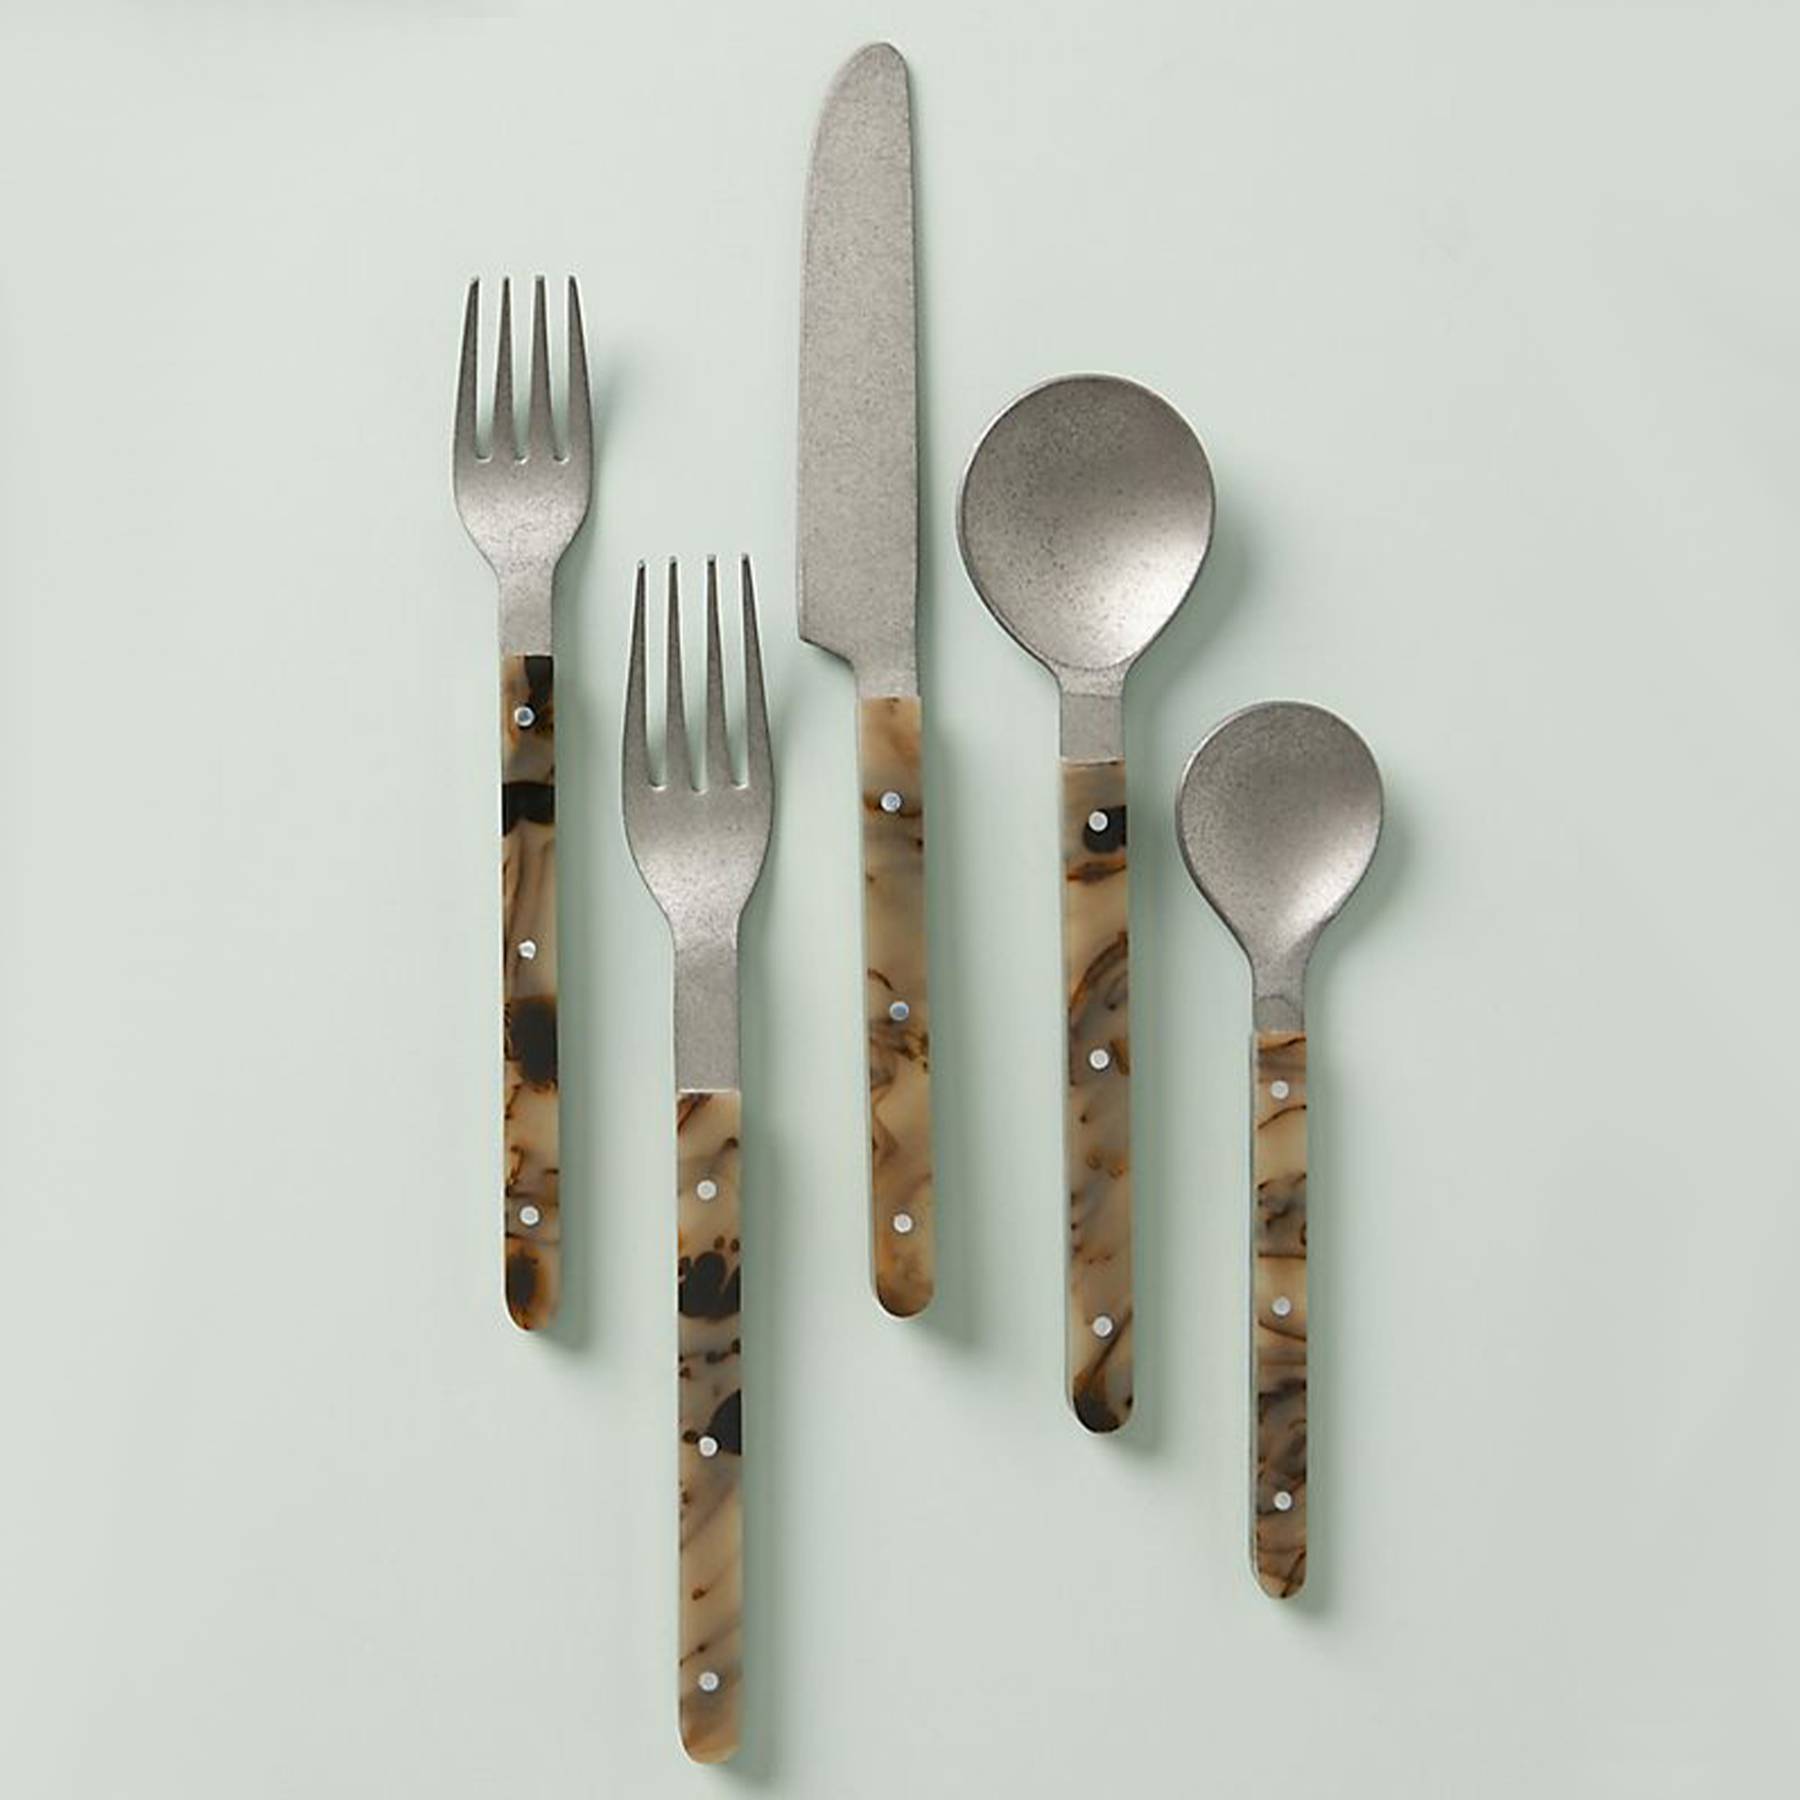 19 Best Cutlery Sets The Best Cutlery Set To Buy Glamour UK